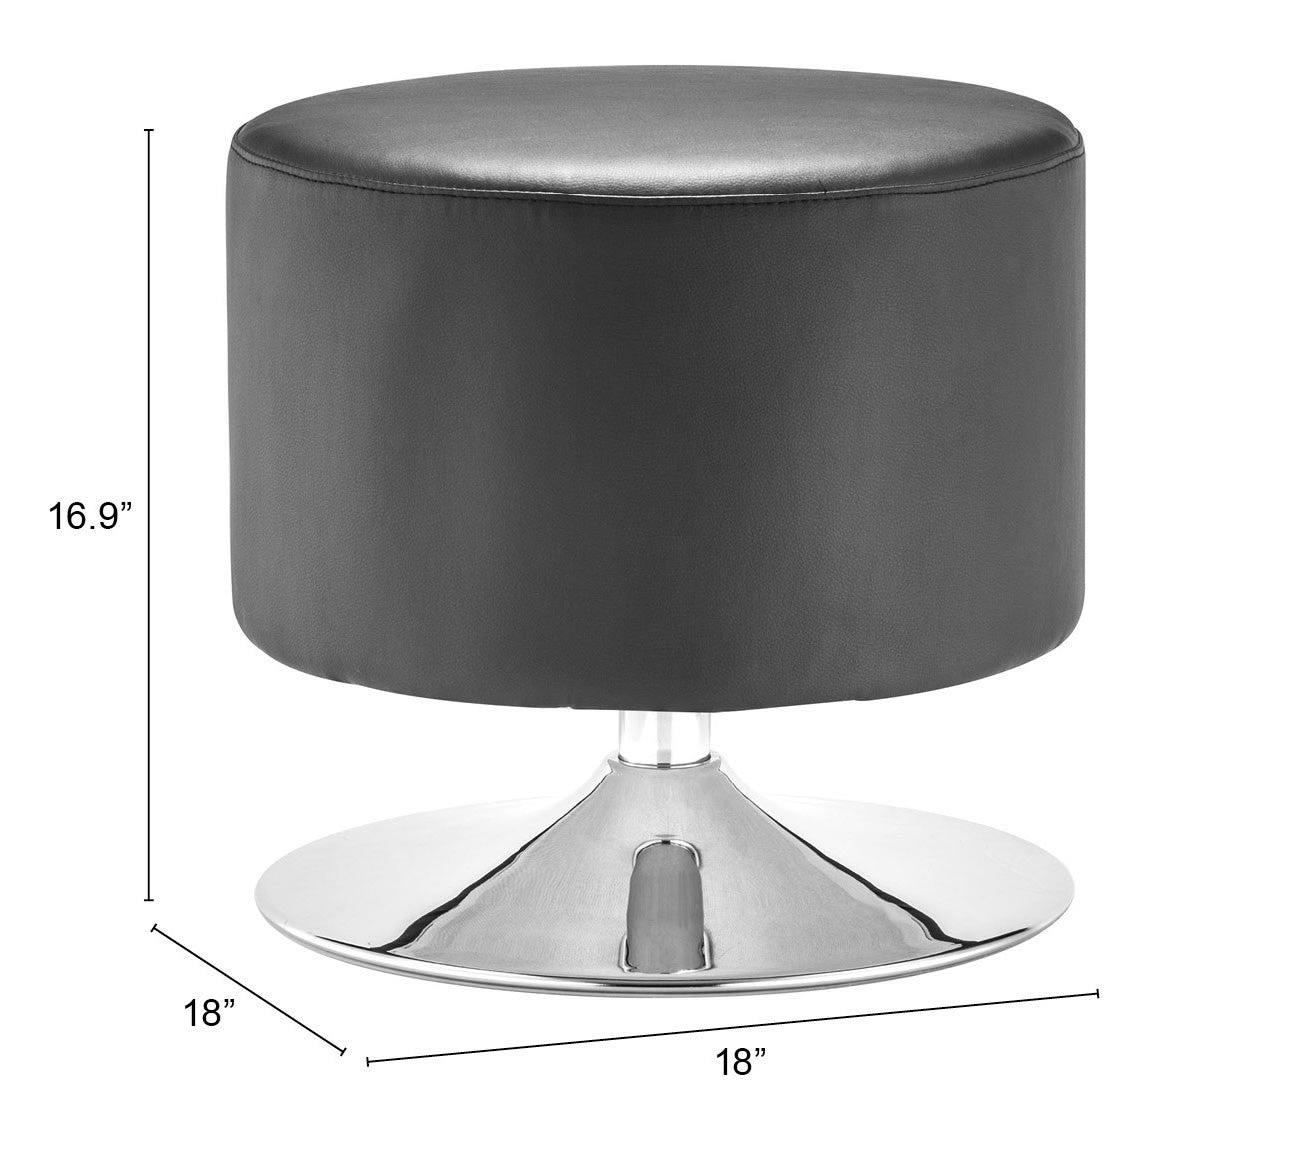 18" Black Faux Leather With Chrome Round Ottoman